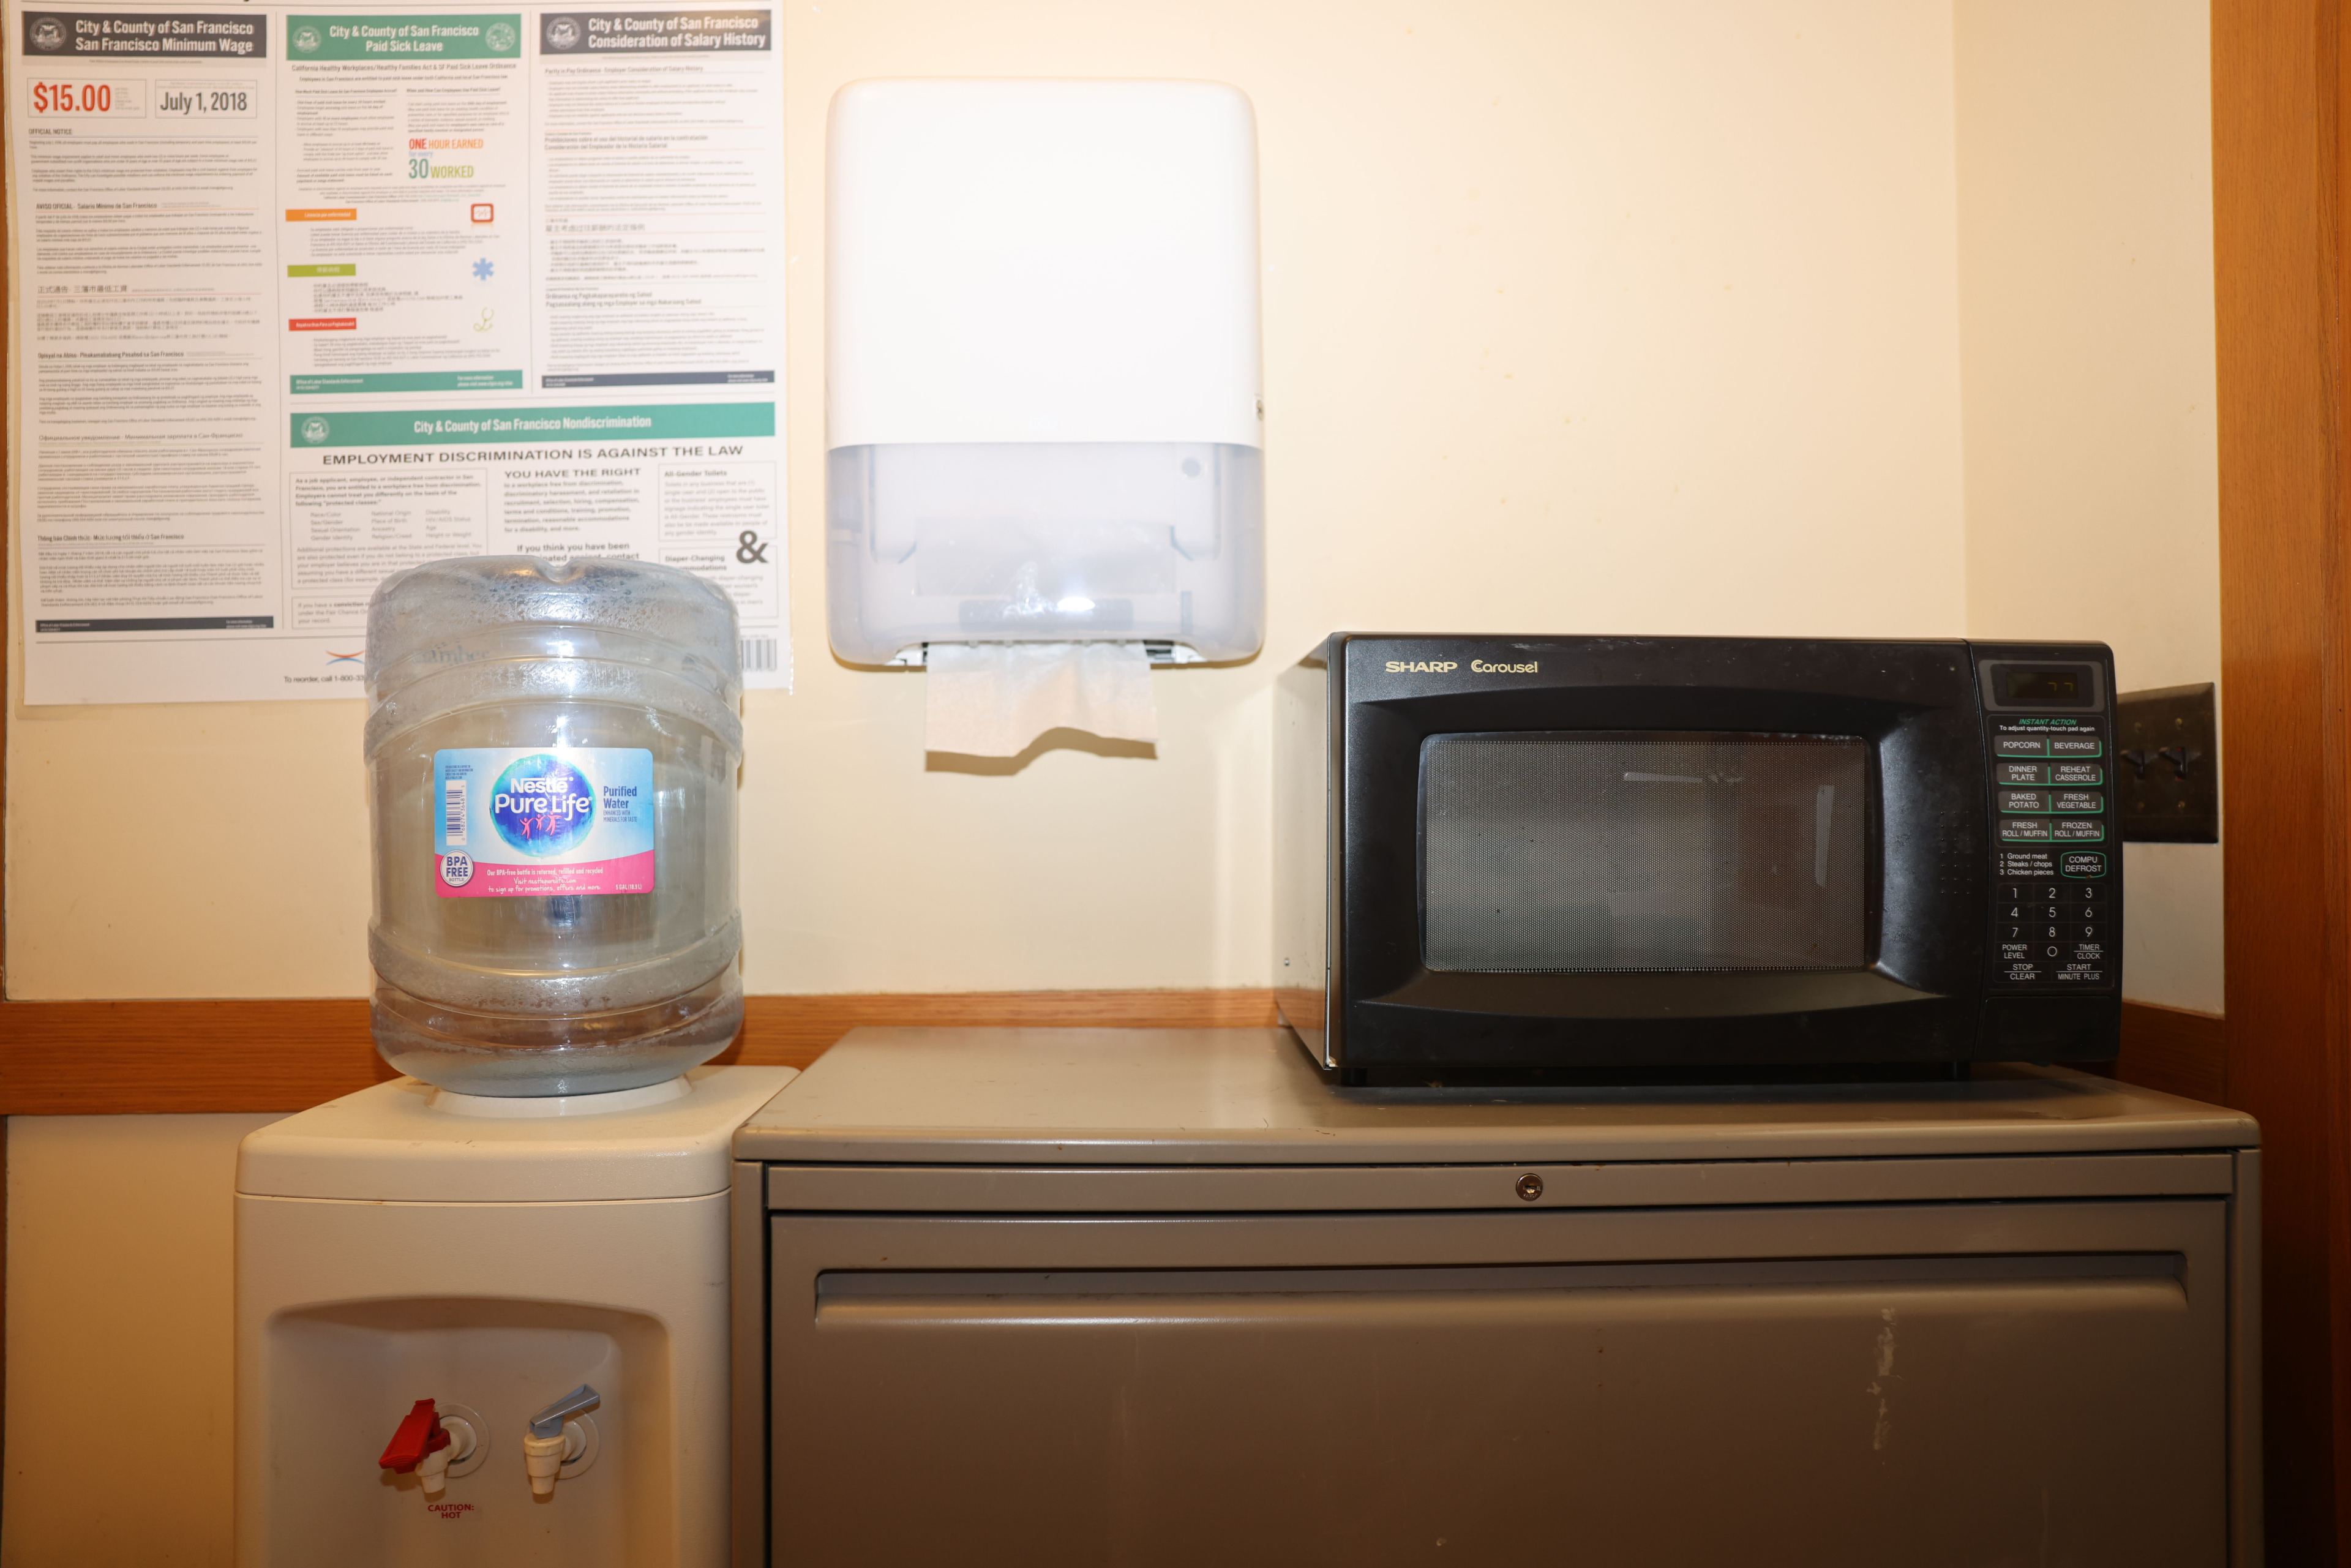 A water cooler, paper towel dispenser, microwave, and notices on a wall in an office break room.